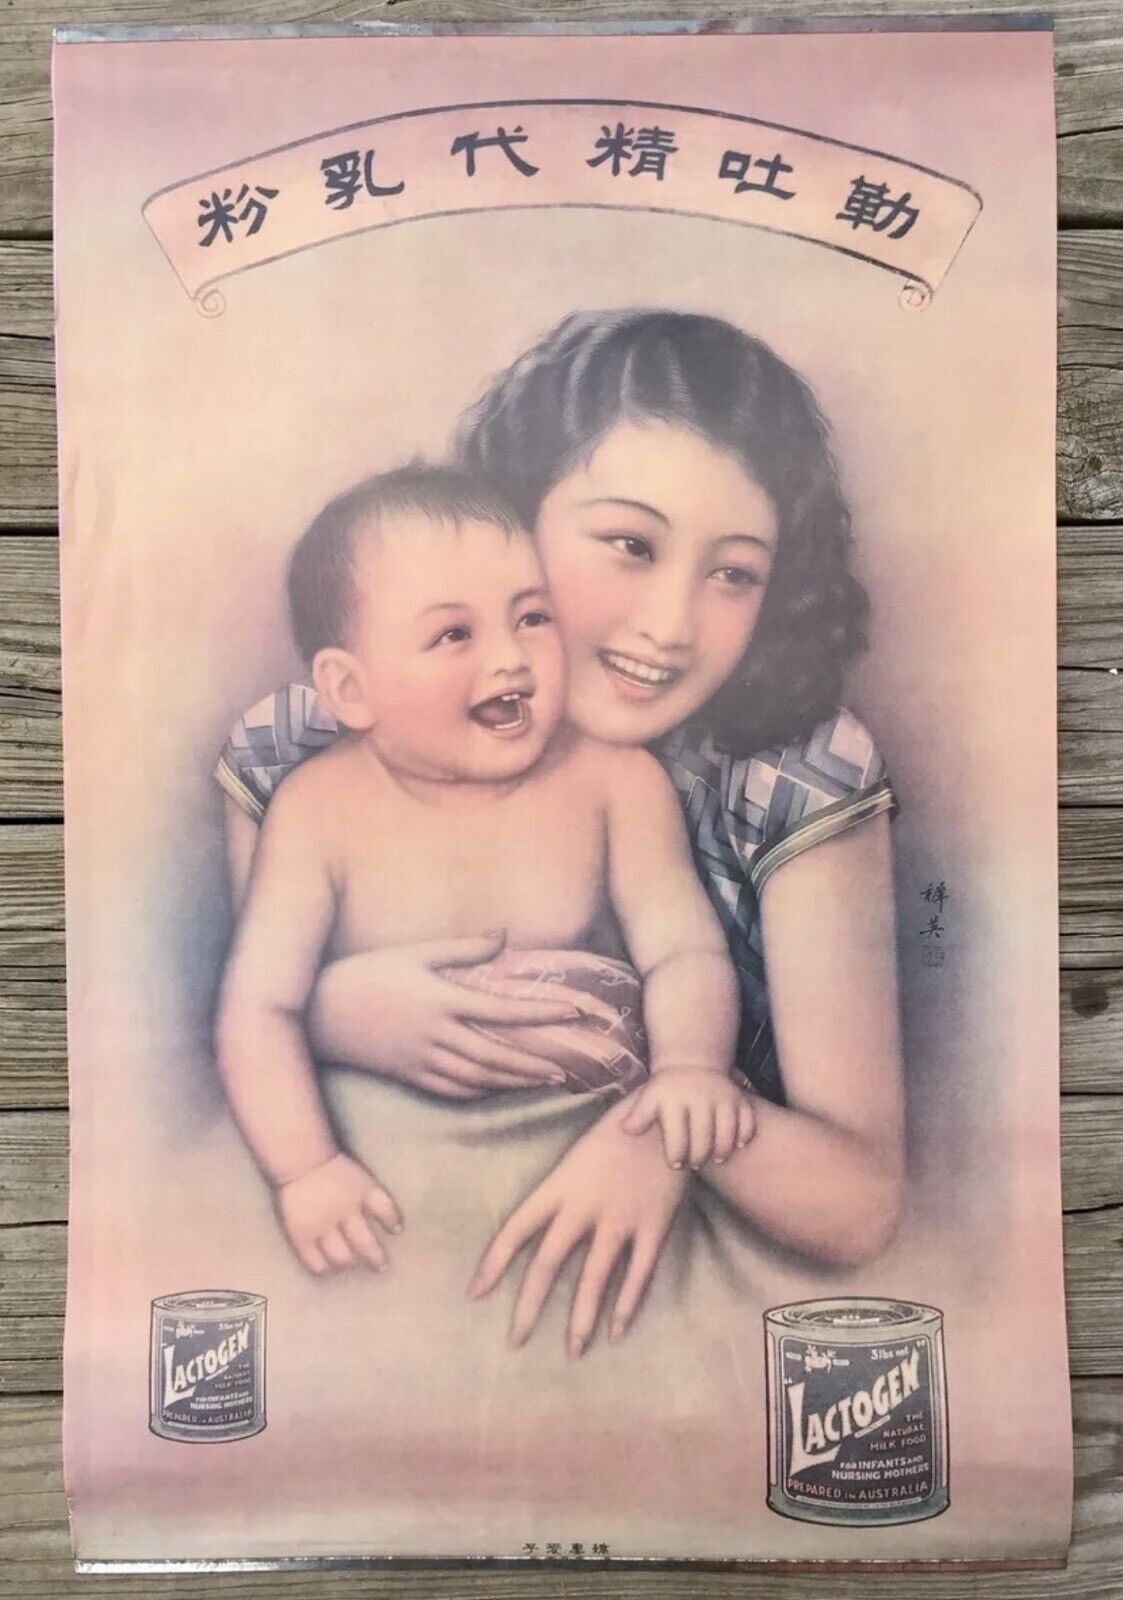 Chinese Lactogen Powdered Milk Vintage Advertising Poster, 31” x 19.5”